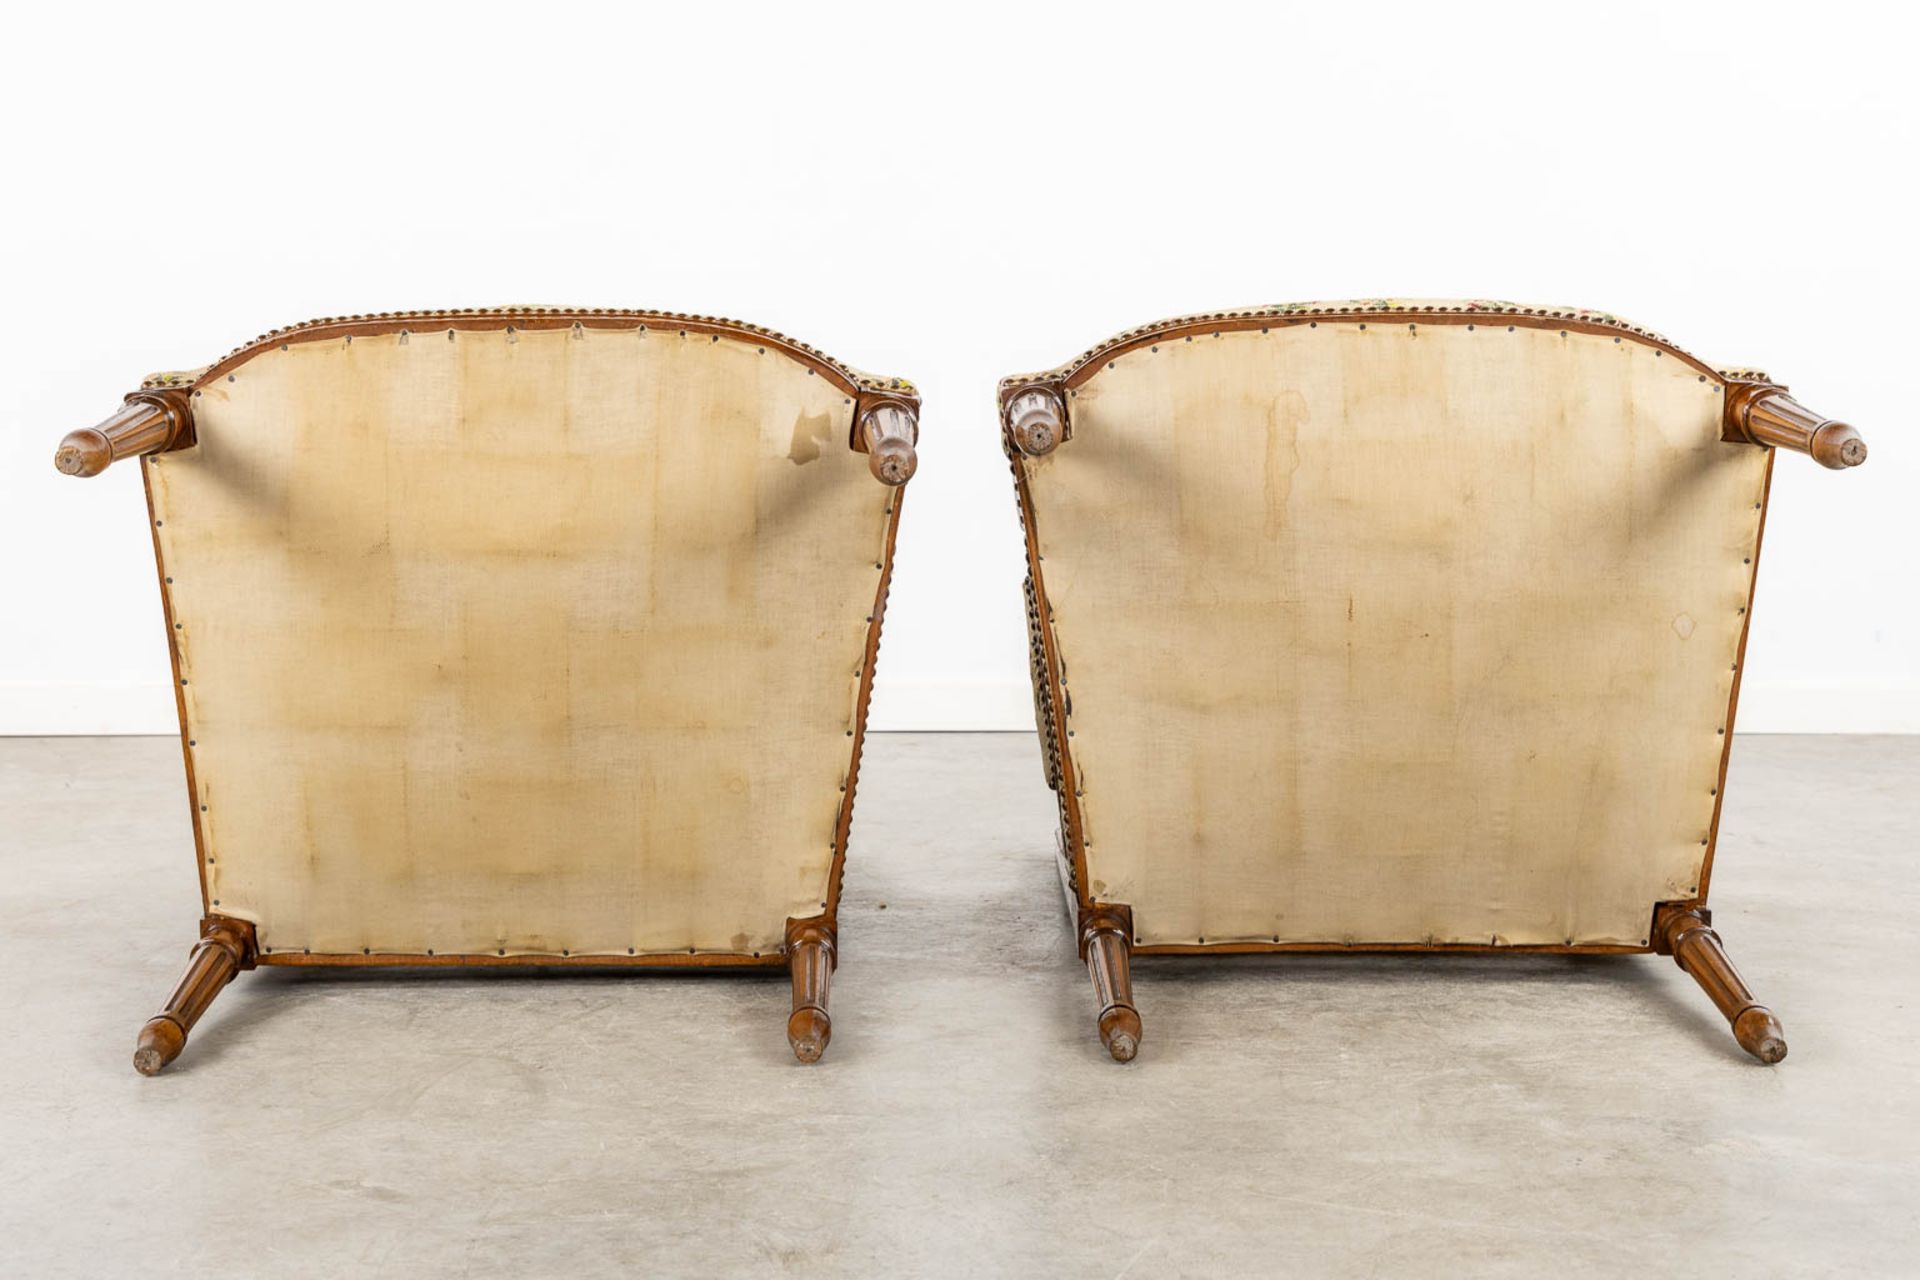 A pair of wood-sculptured armchairs with emboidered upholstry. Louis XVI style. (L:62 x W:64 x H:100 - Image 7 of 11